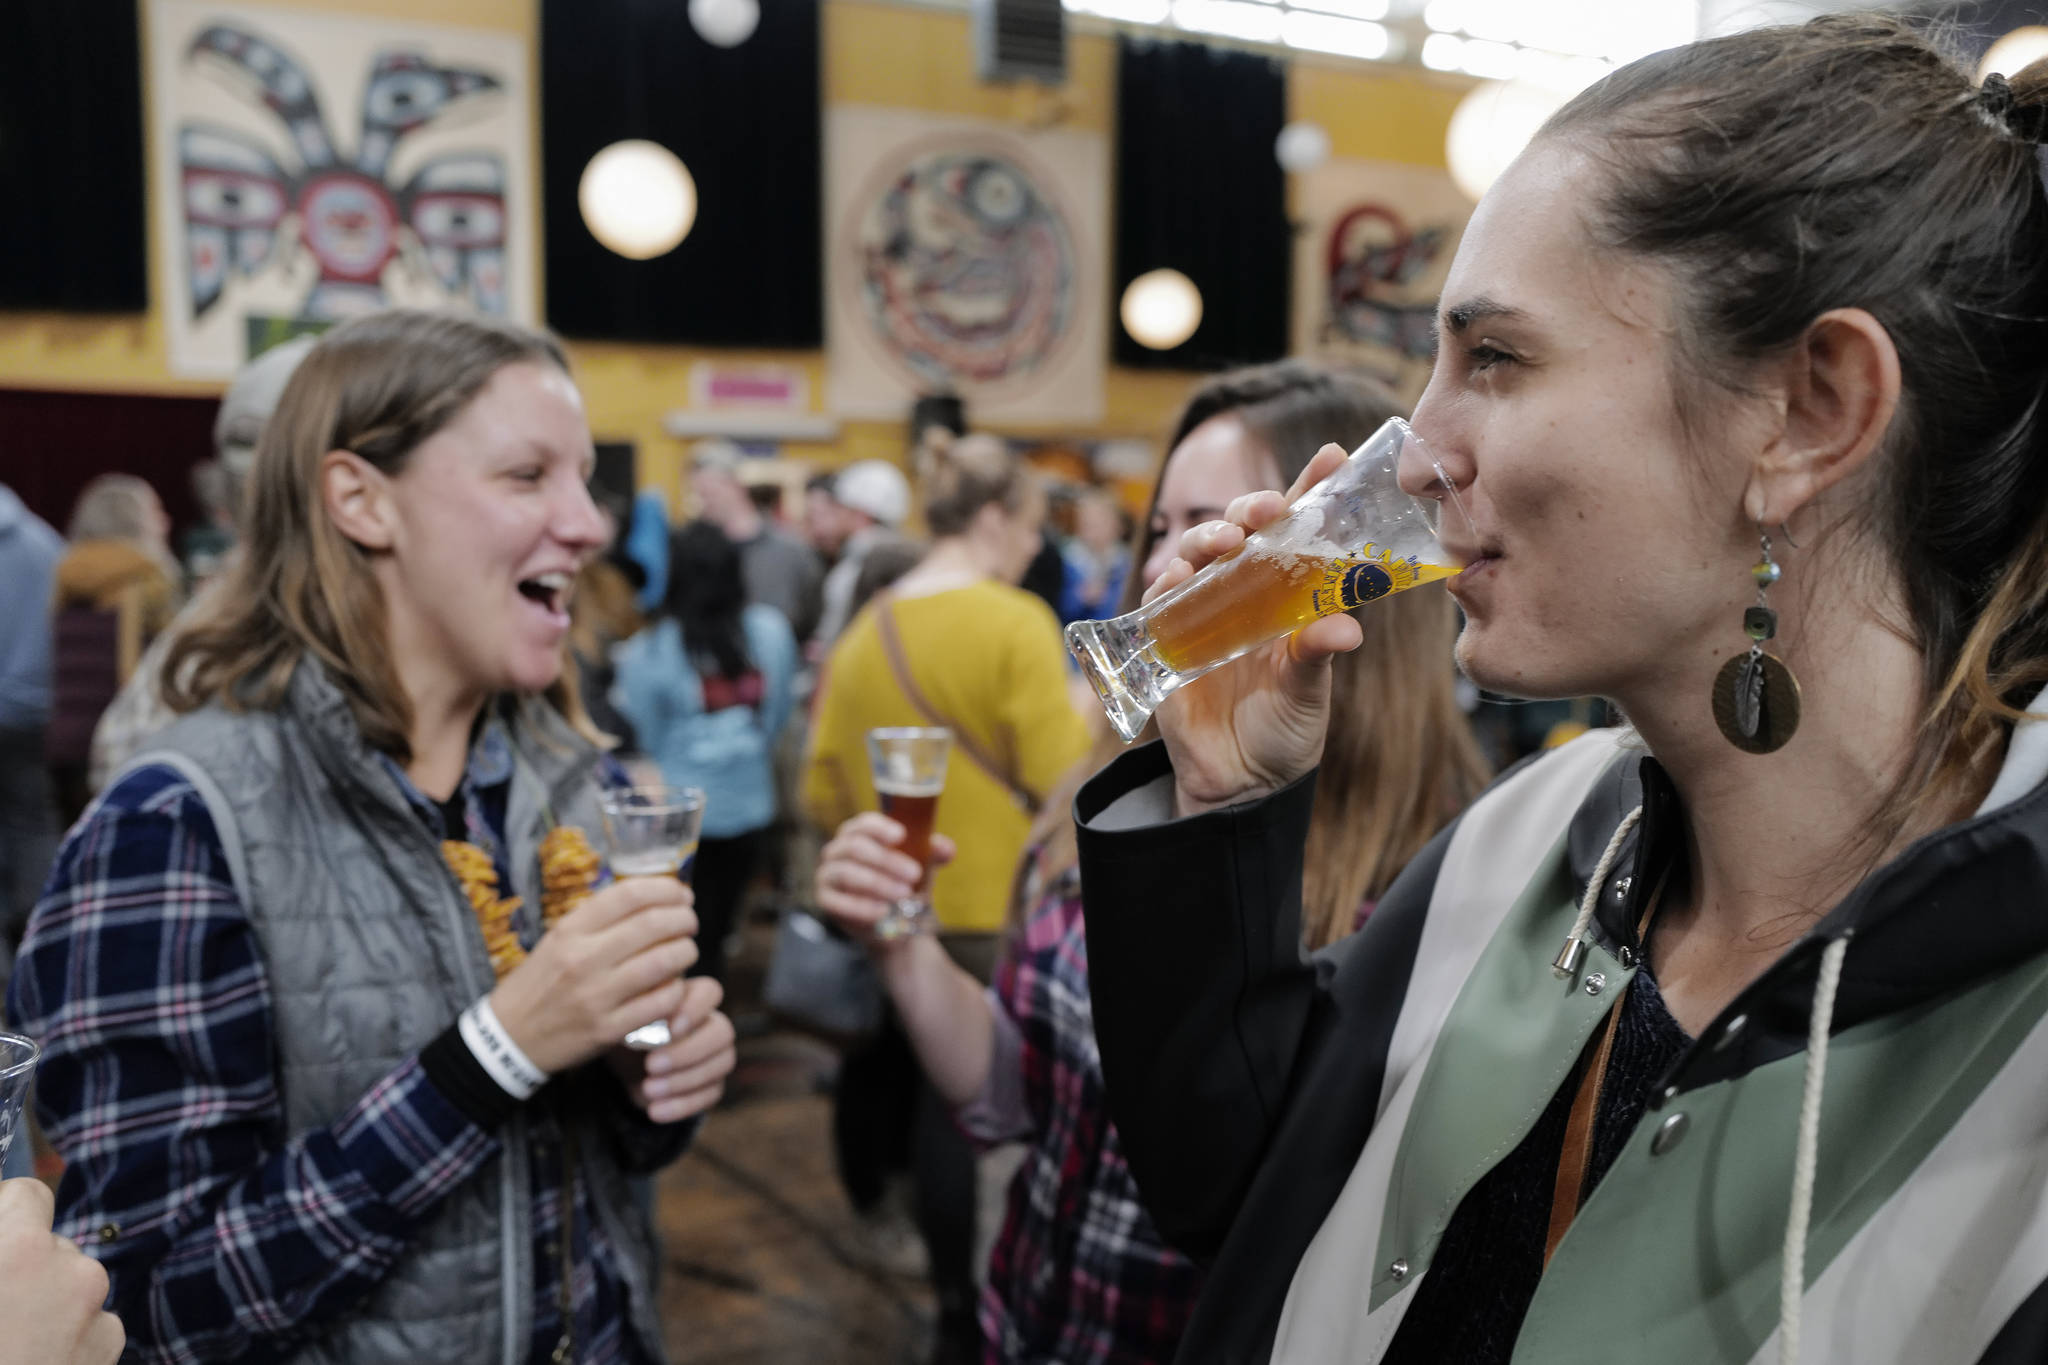 Malia Stauffer, right, drinks with friends at the Rotary Club of Juneau’s Eighth Annual Capital Brewfest at the Juneau Arts and Culture Center on Saturday, Sept. 21, 2019. Twenty brewing and distribution companies were on hand for the fundraiser to benefit the University of Alaska and Rotary’s service projects, scholarships, international youth exchanges and other project. The event was sold out with 900 tickets sold. (Michael Penn | Juneau Empire)